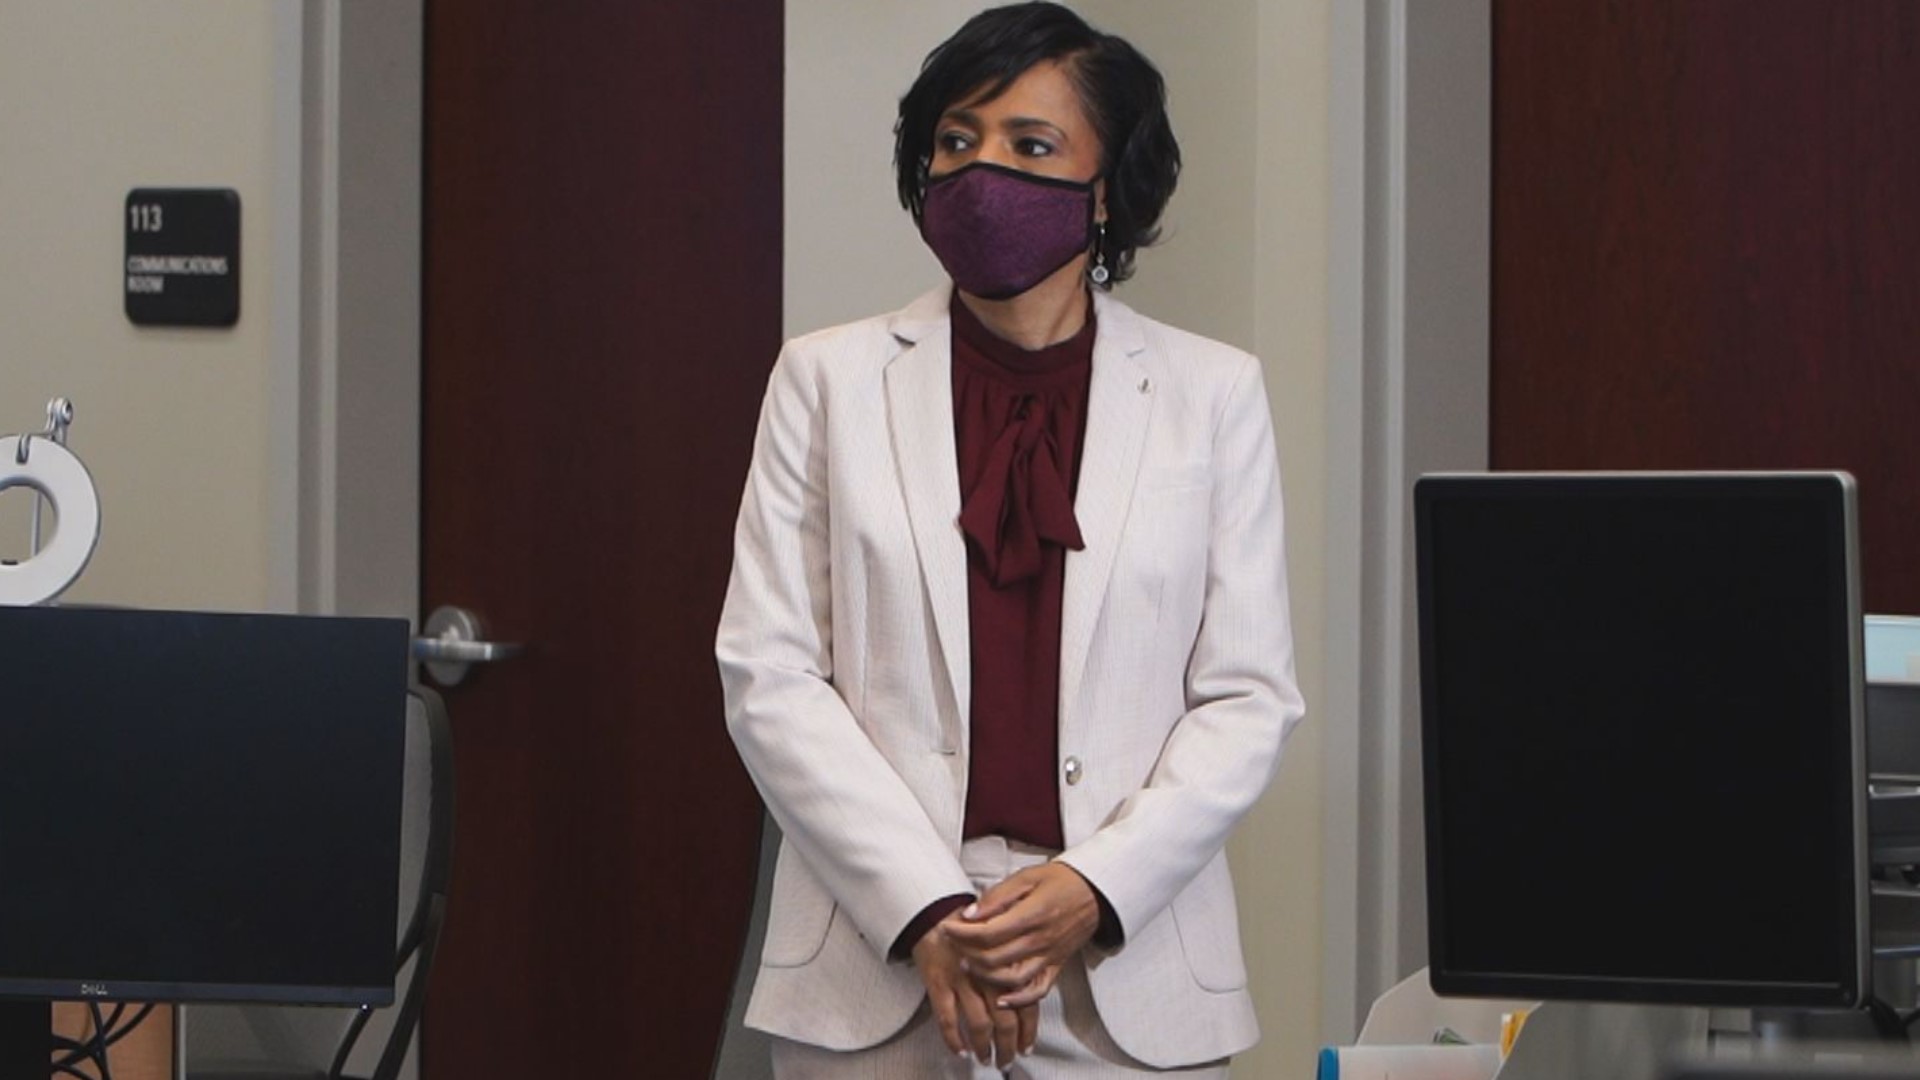 Prince George's County Executive Angela Alsobrooks shares how she led -- and survived -- during a pandemic that impacted her county more than any other in Maryland.